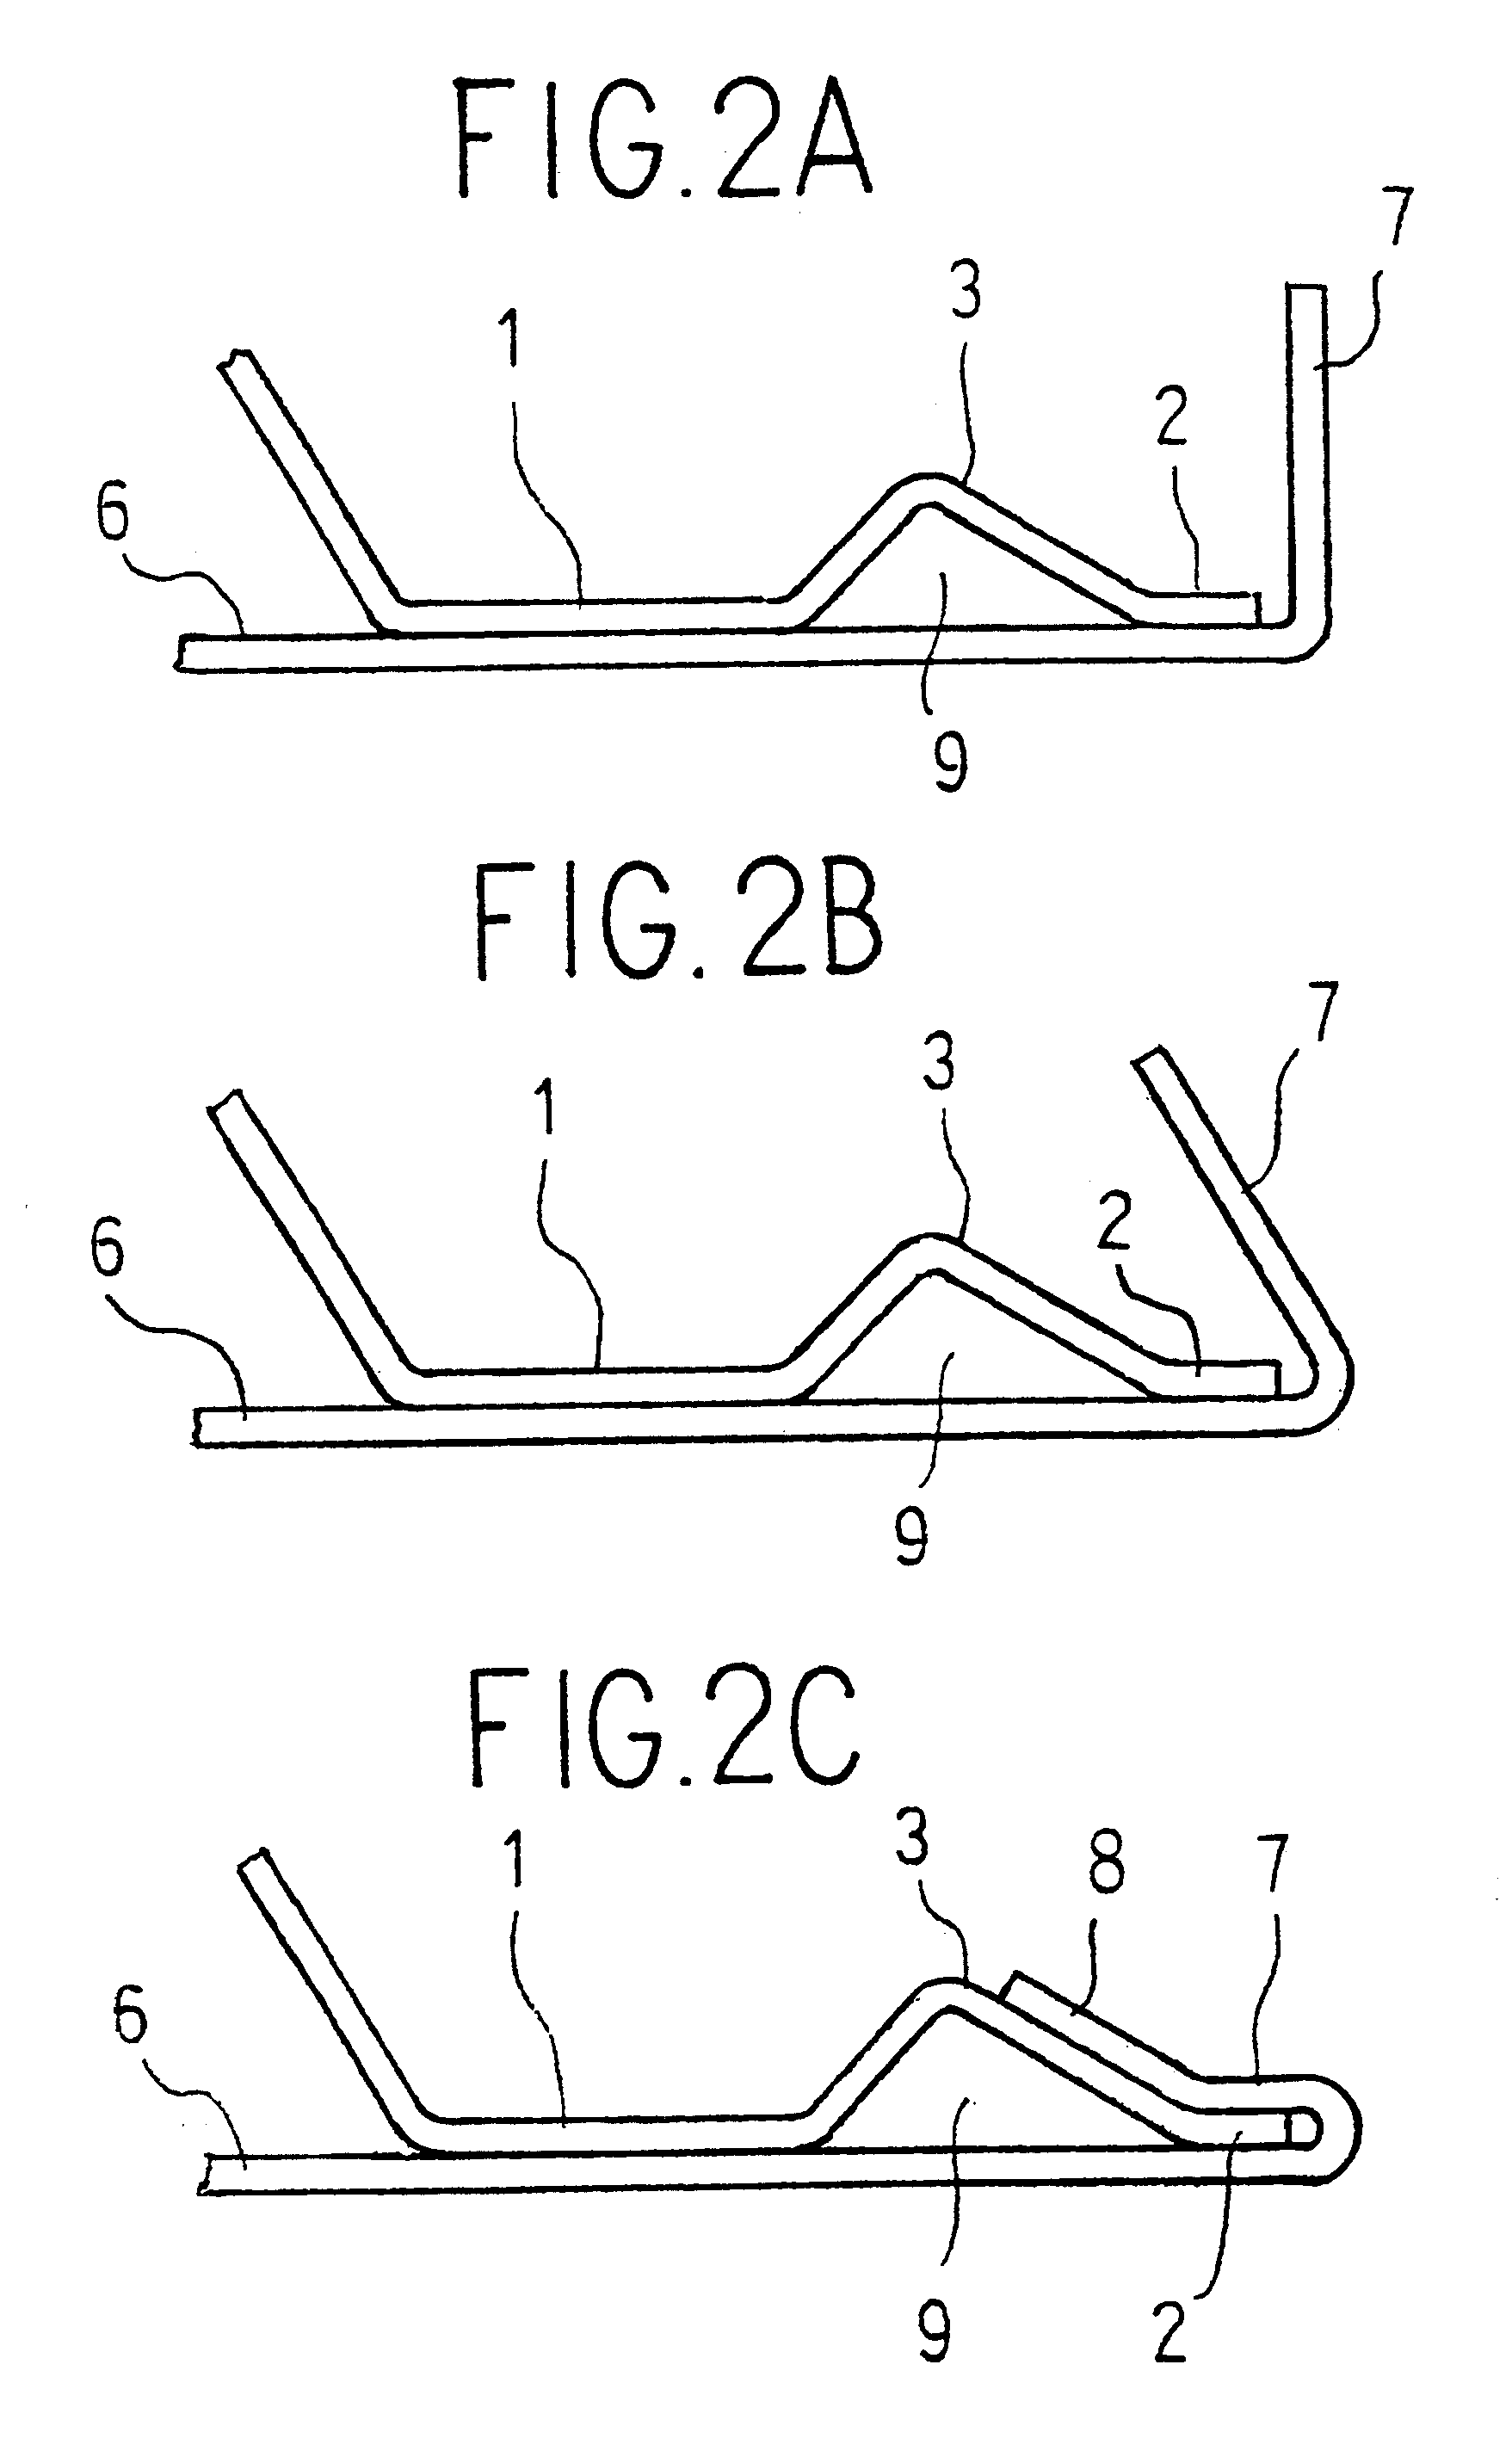 Structure of hemmed together metal plate materials